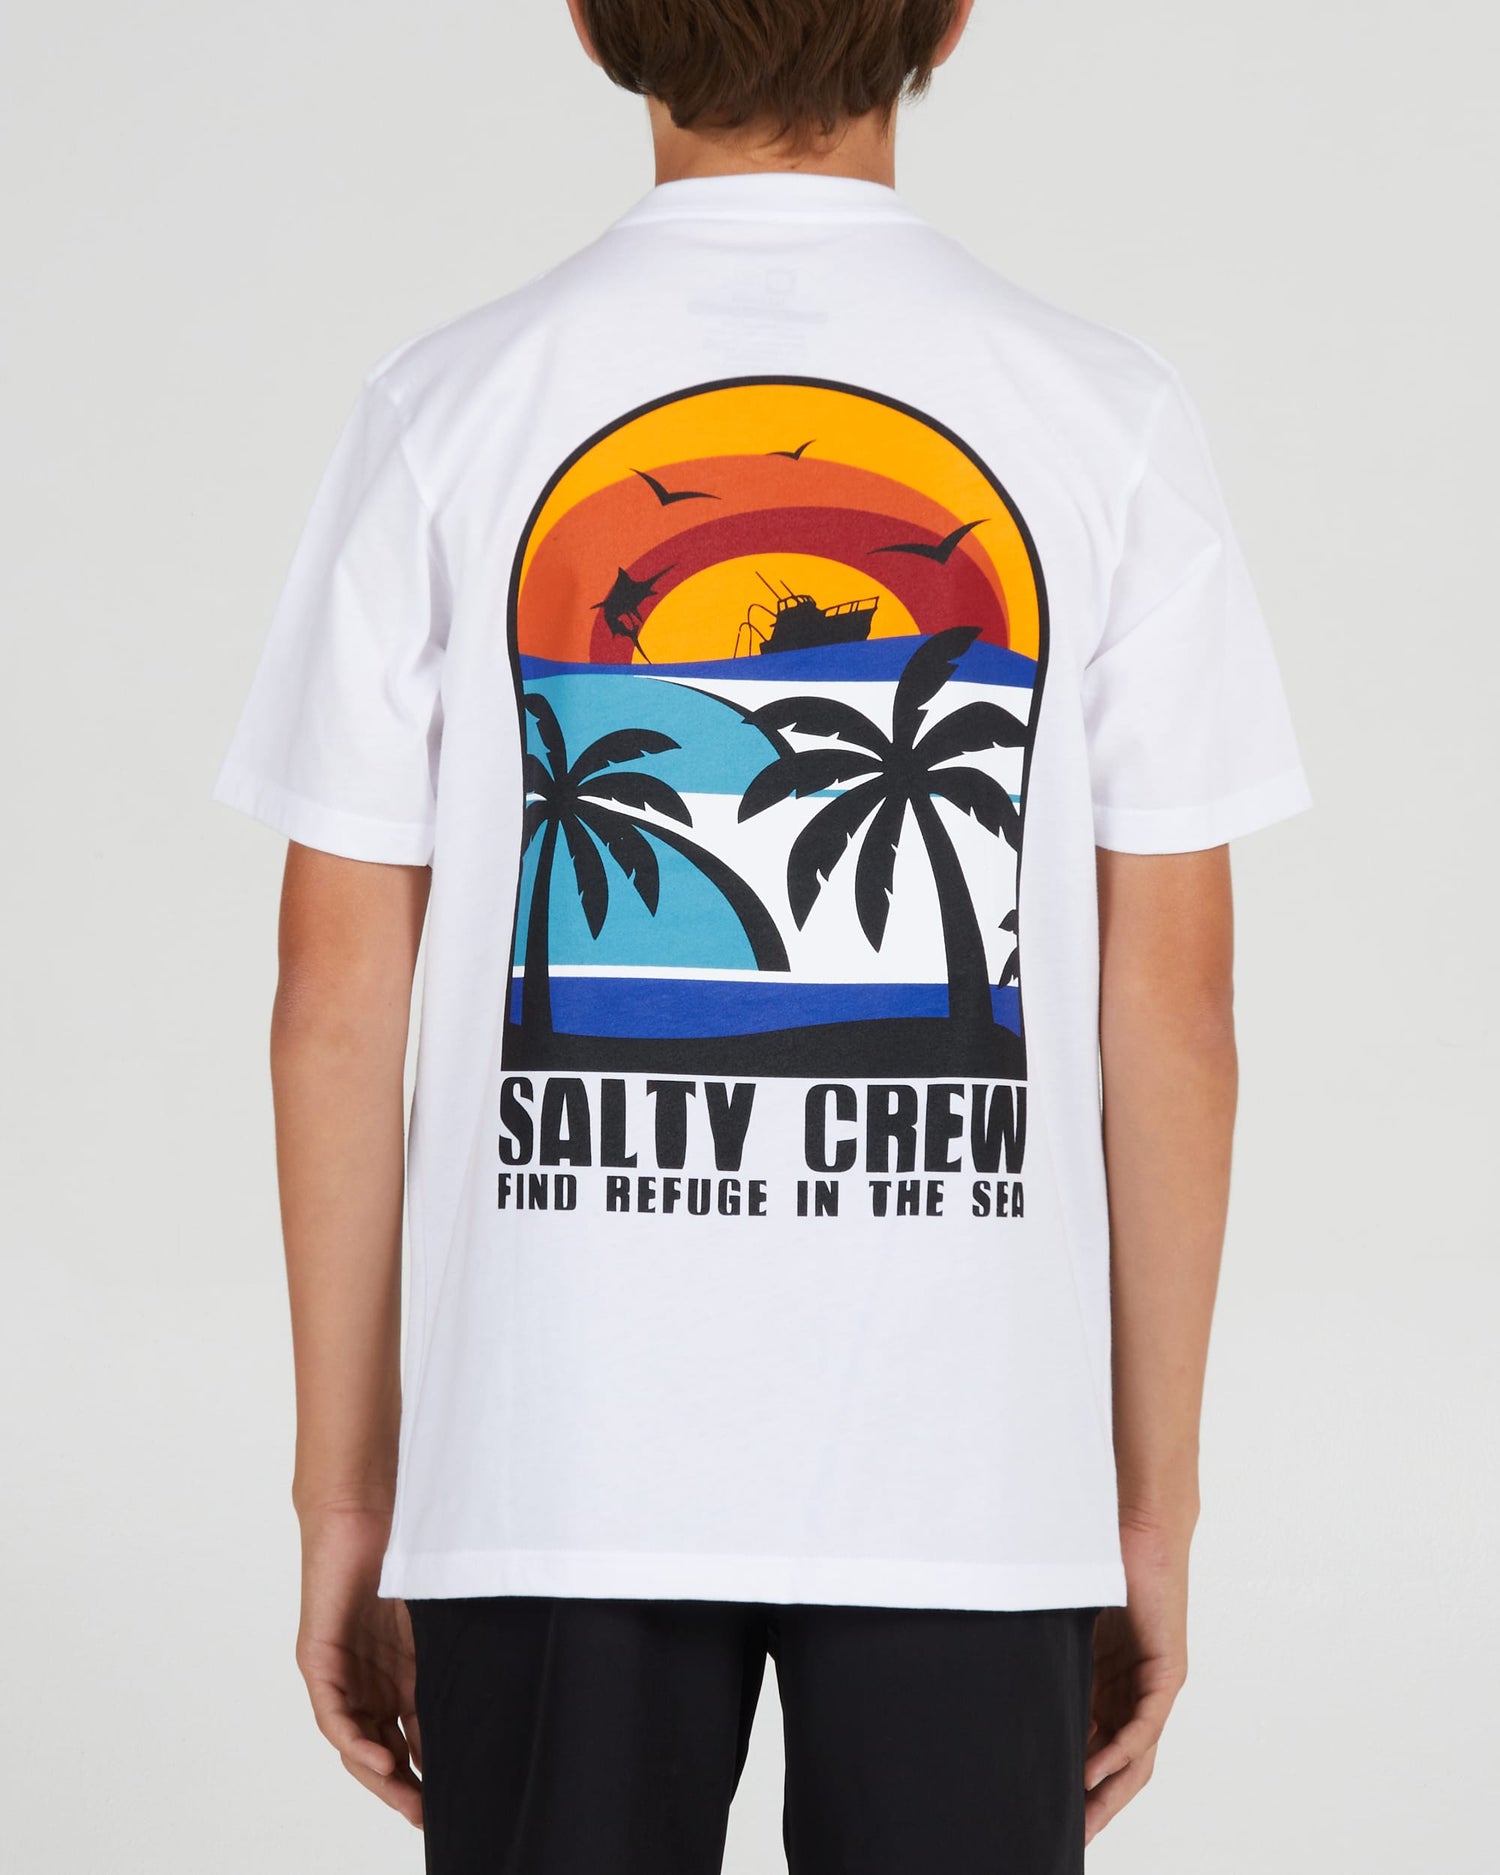 Salty crew T-SHIRTS S/S BEACH DAY BOYS S/S TEE - White in White